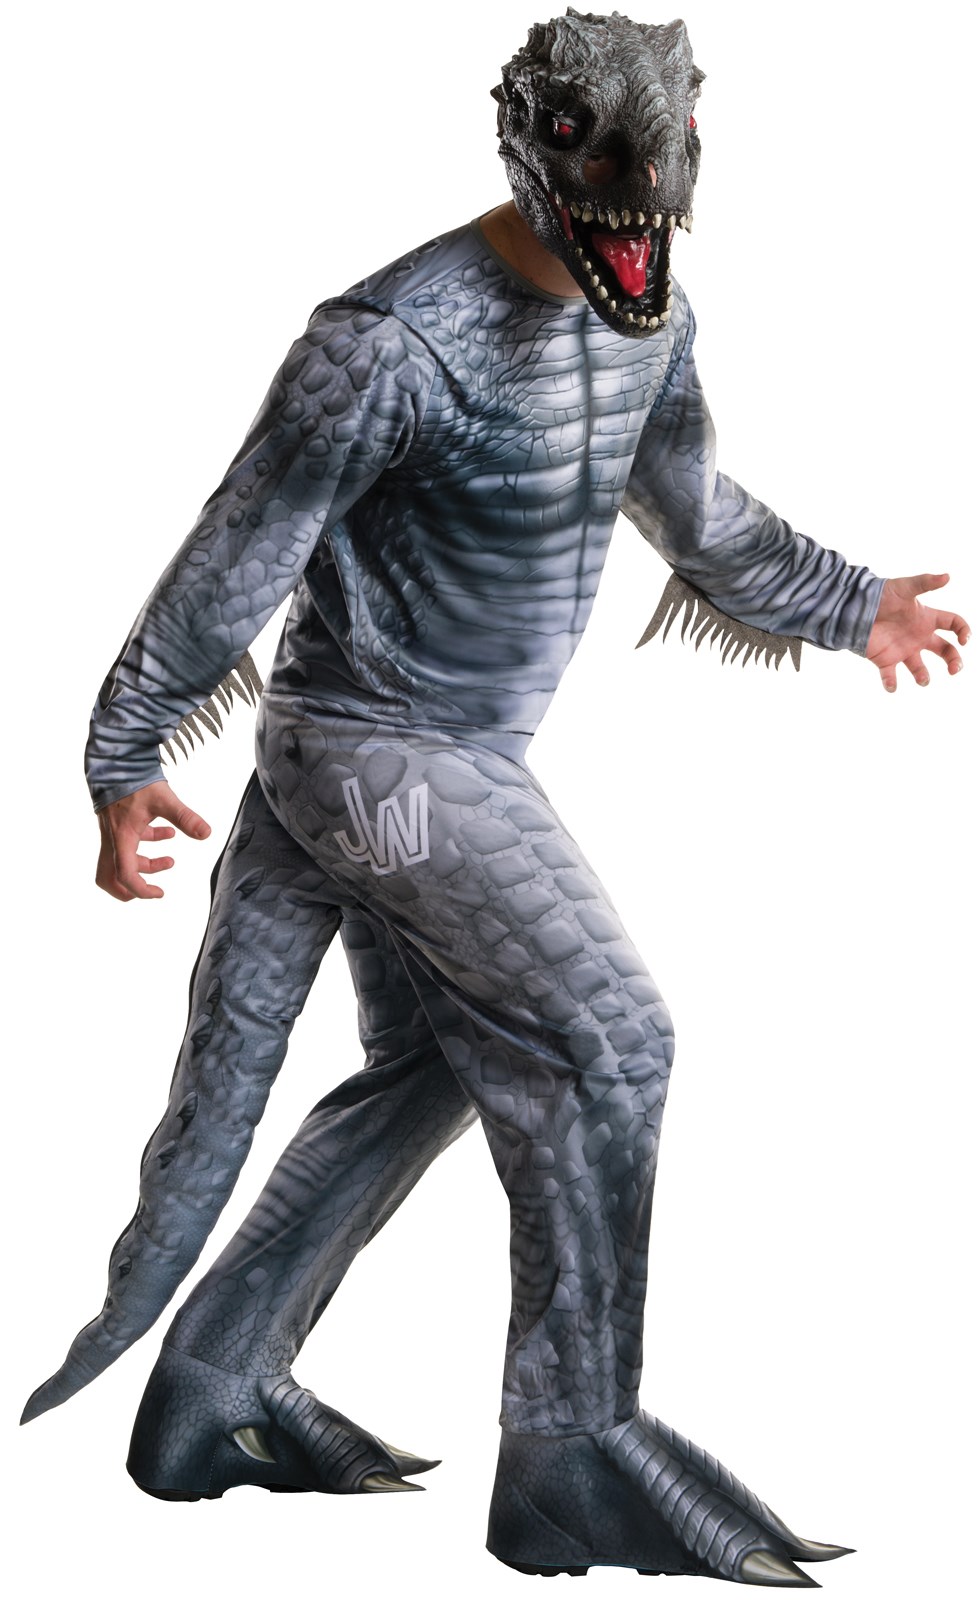 Jurassic World - Indominus Rex Costume For Adults